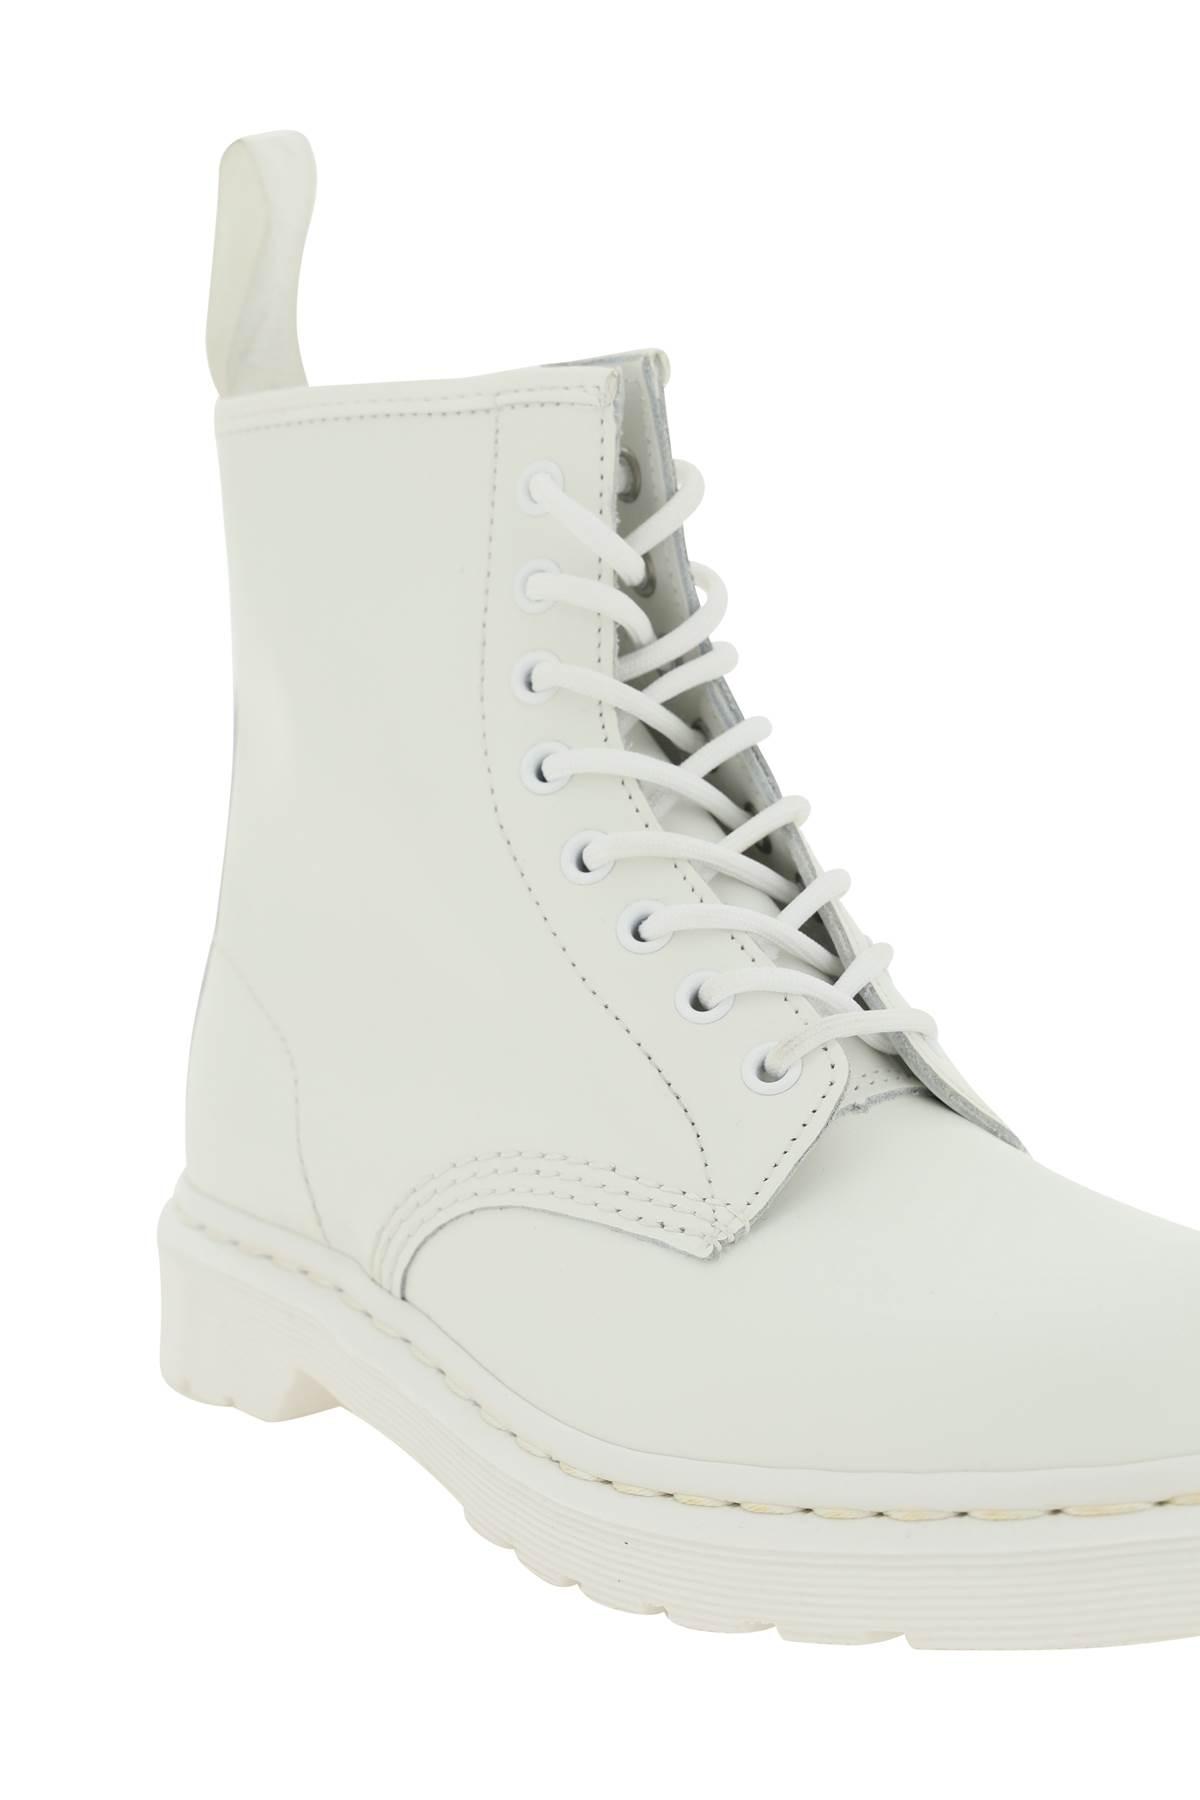 Dr. Martens Dr.martens 1460 Mono Smooth Lace-up Combat Boots in White | Lyst